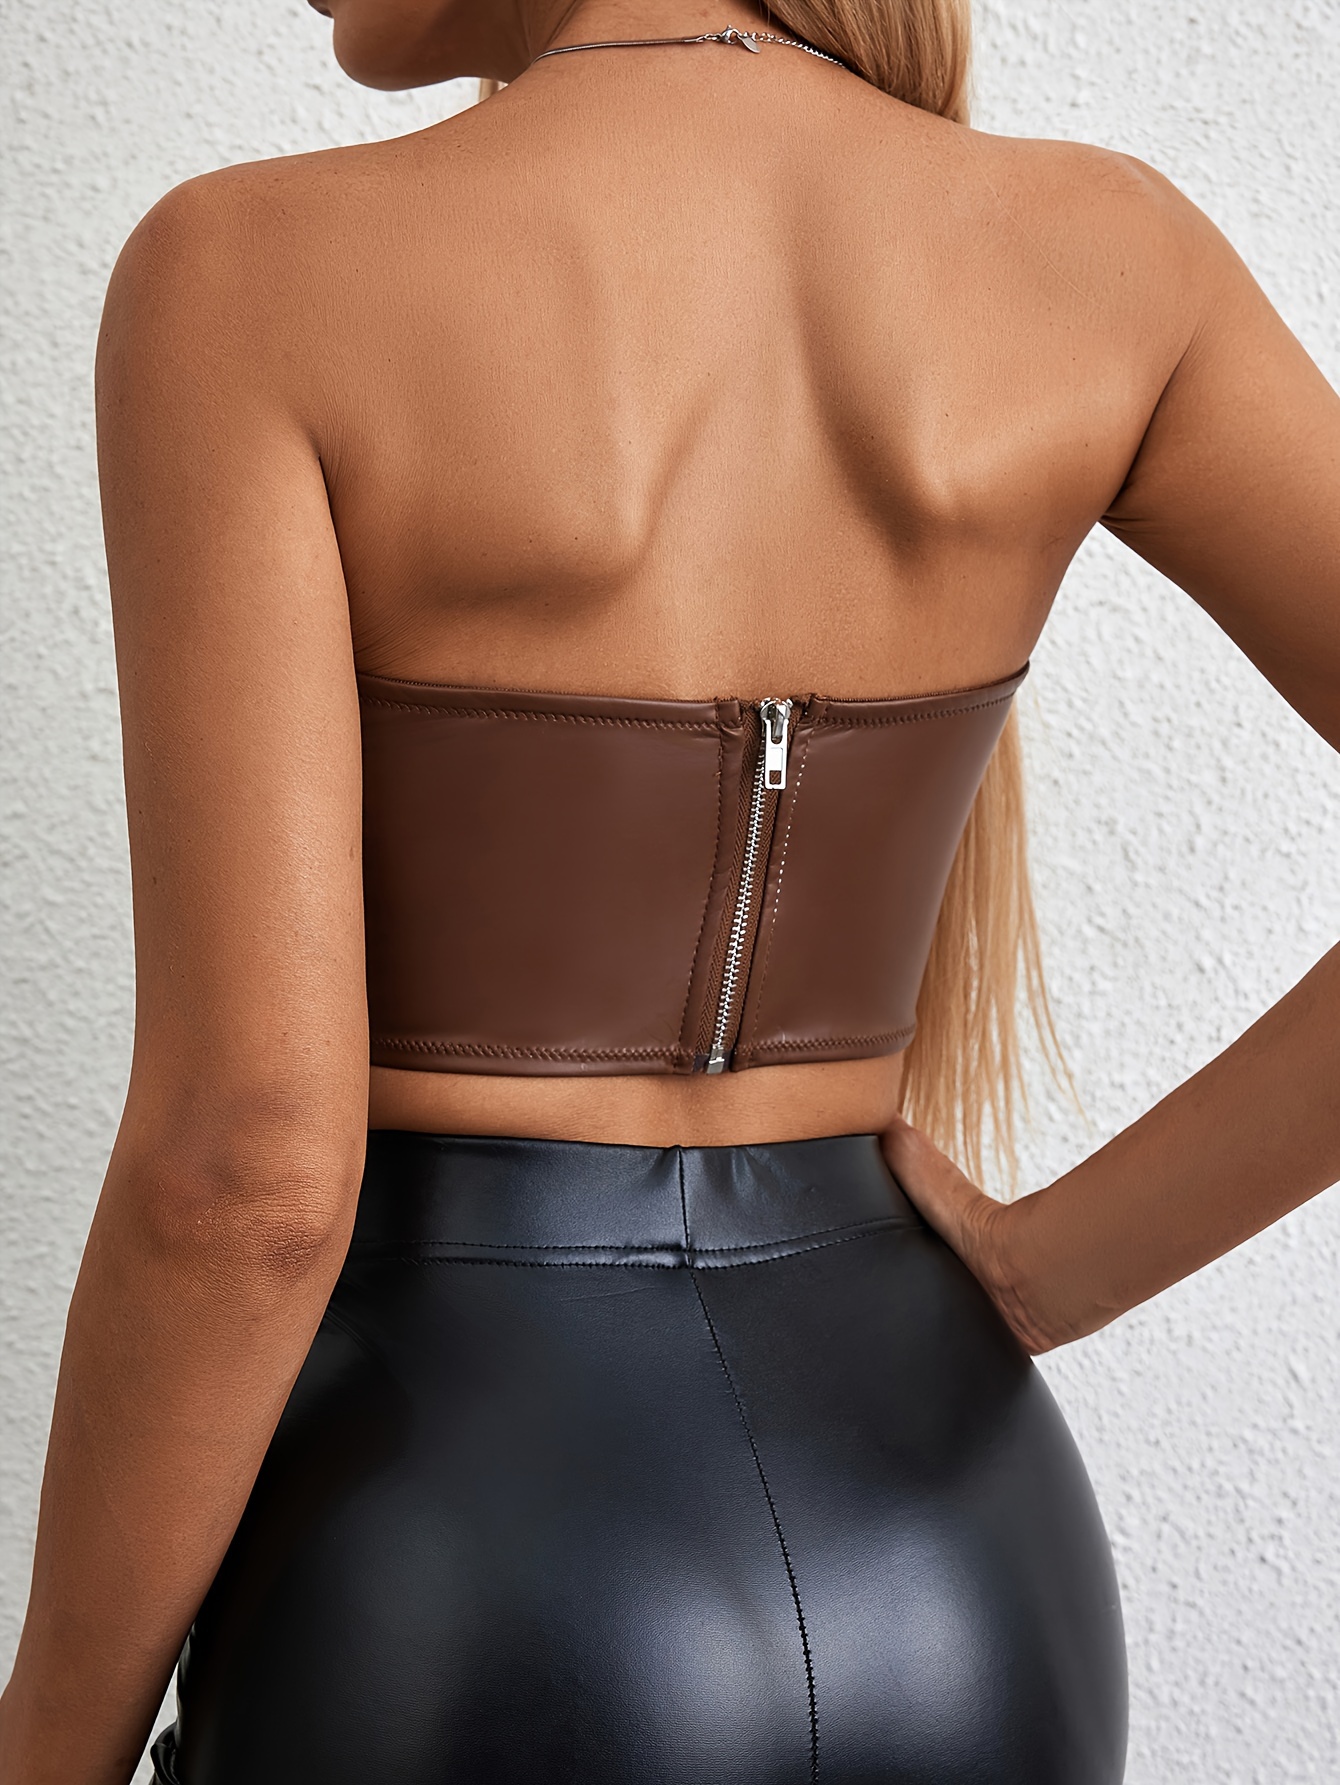  Women's Black Pu Corset Top Cropped Leather Bustier Crop Top  (US,8-10) : Clothing, Shoes & Jewelry